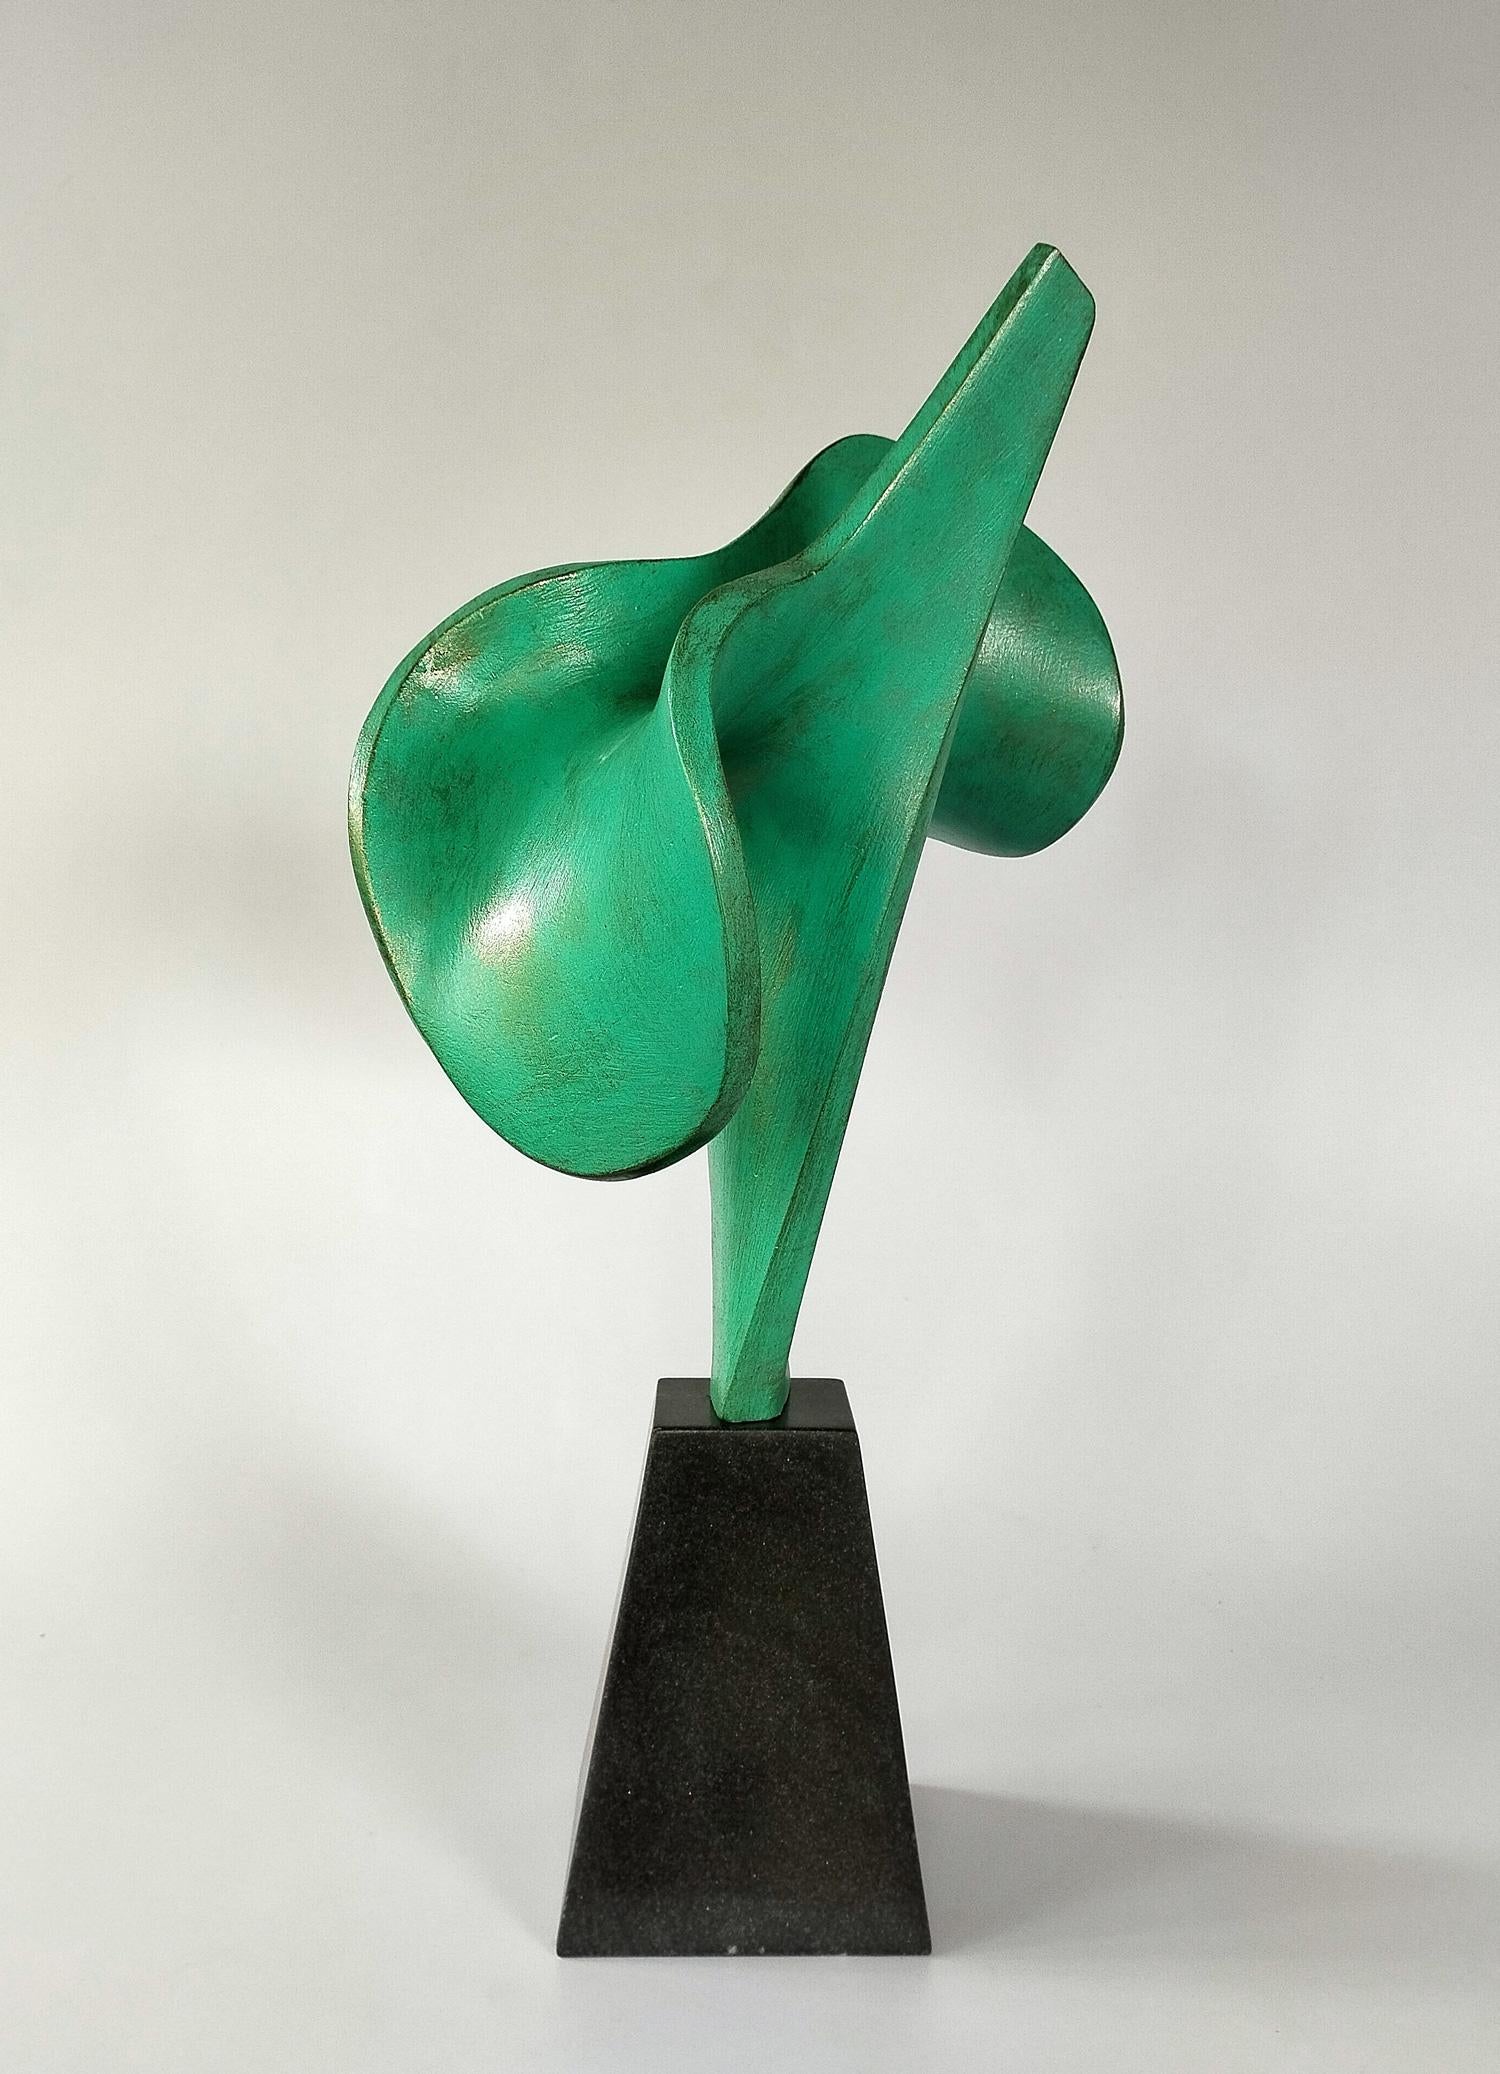 Cast bronze sculpture with classic green patina on marble base. Edition of 3 at this size, available by commission. Other sizes and patina finishes are also available by commission, please inquire for more details.

Pisapia's 